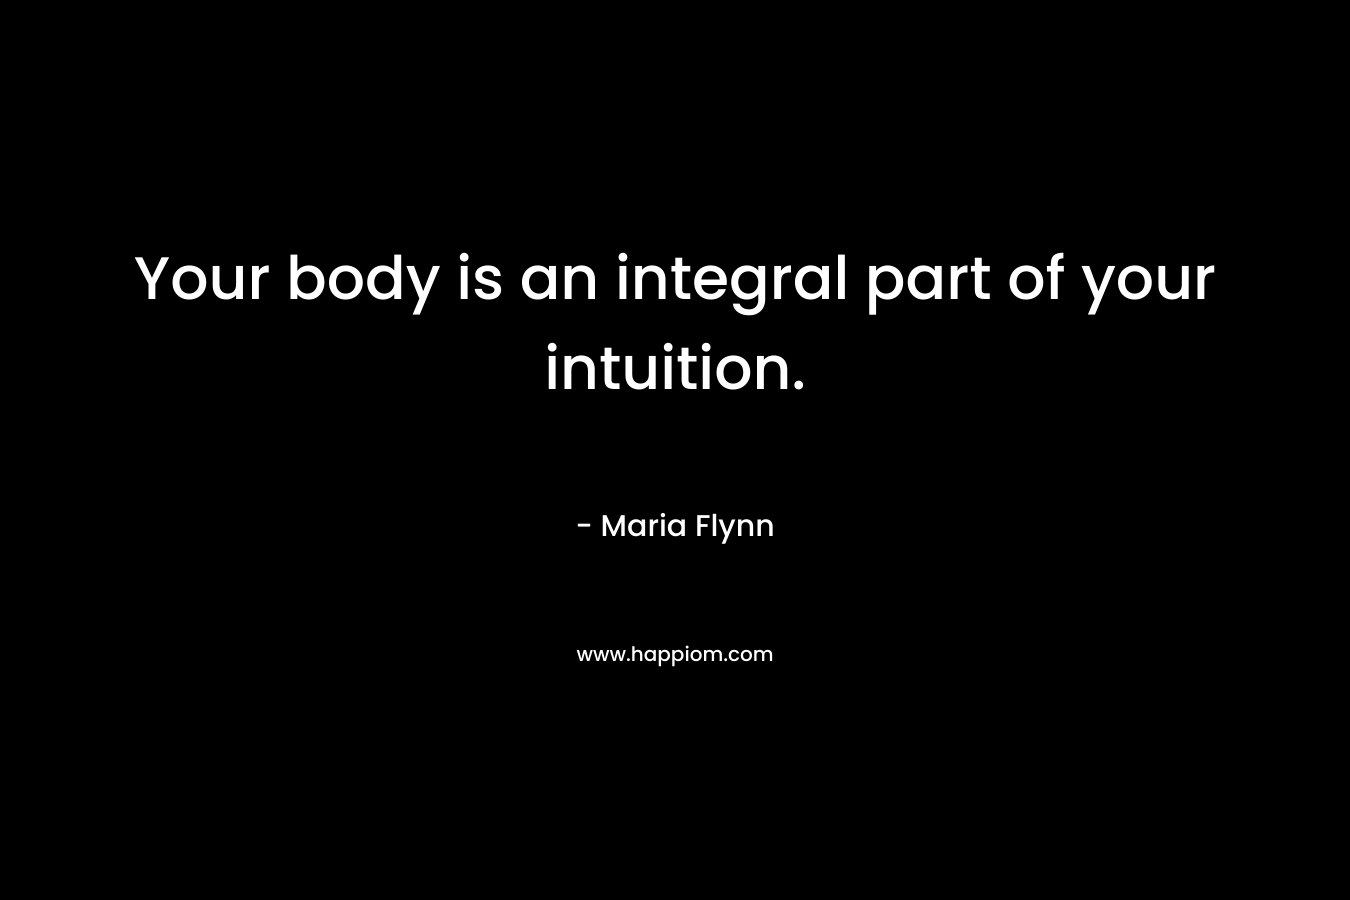 Your body is an integral part of your intuition.